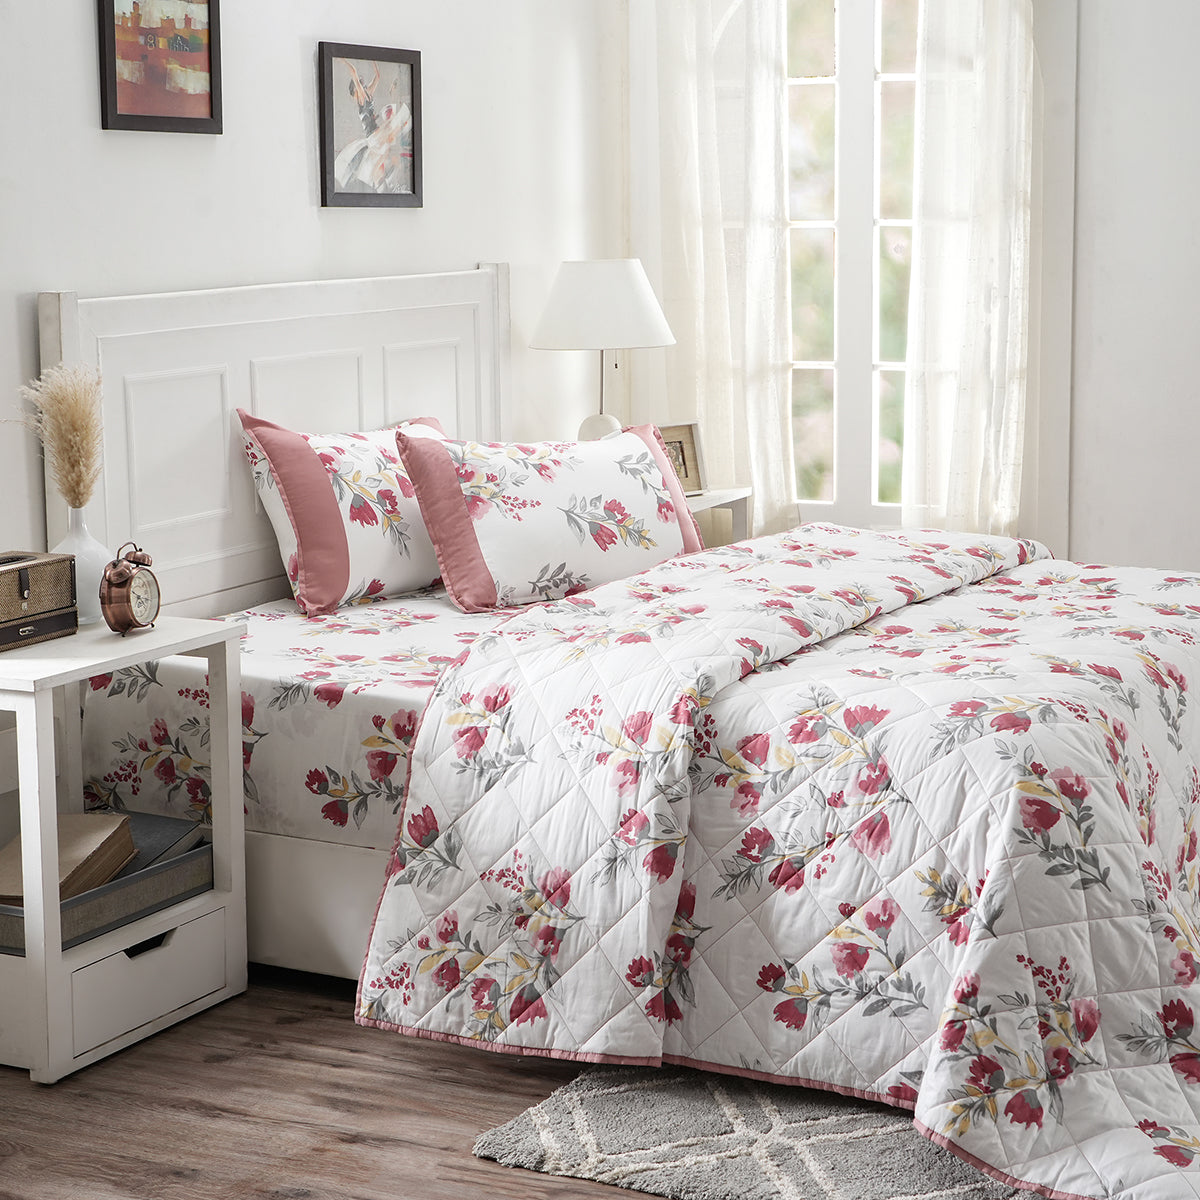 Royal Botanic Floral Leaves Print Multi 4PC Quilt/Quilted Bed Cover Set